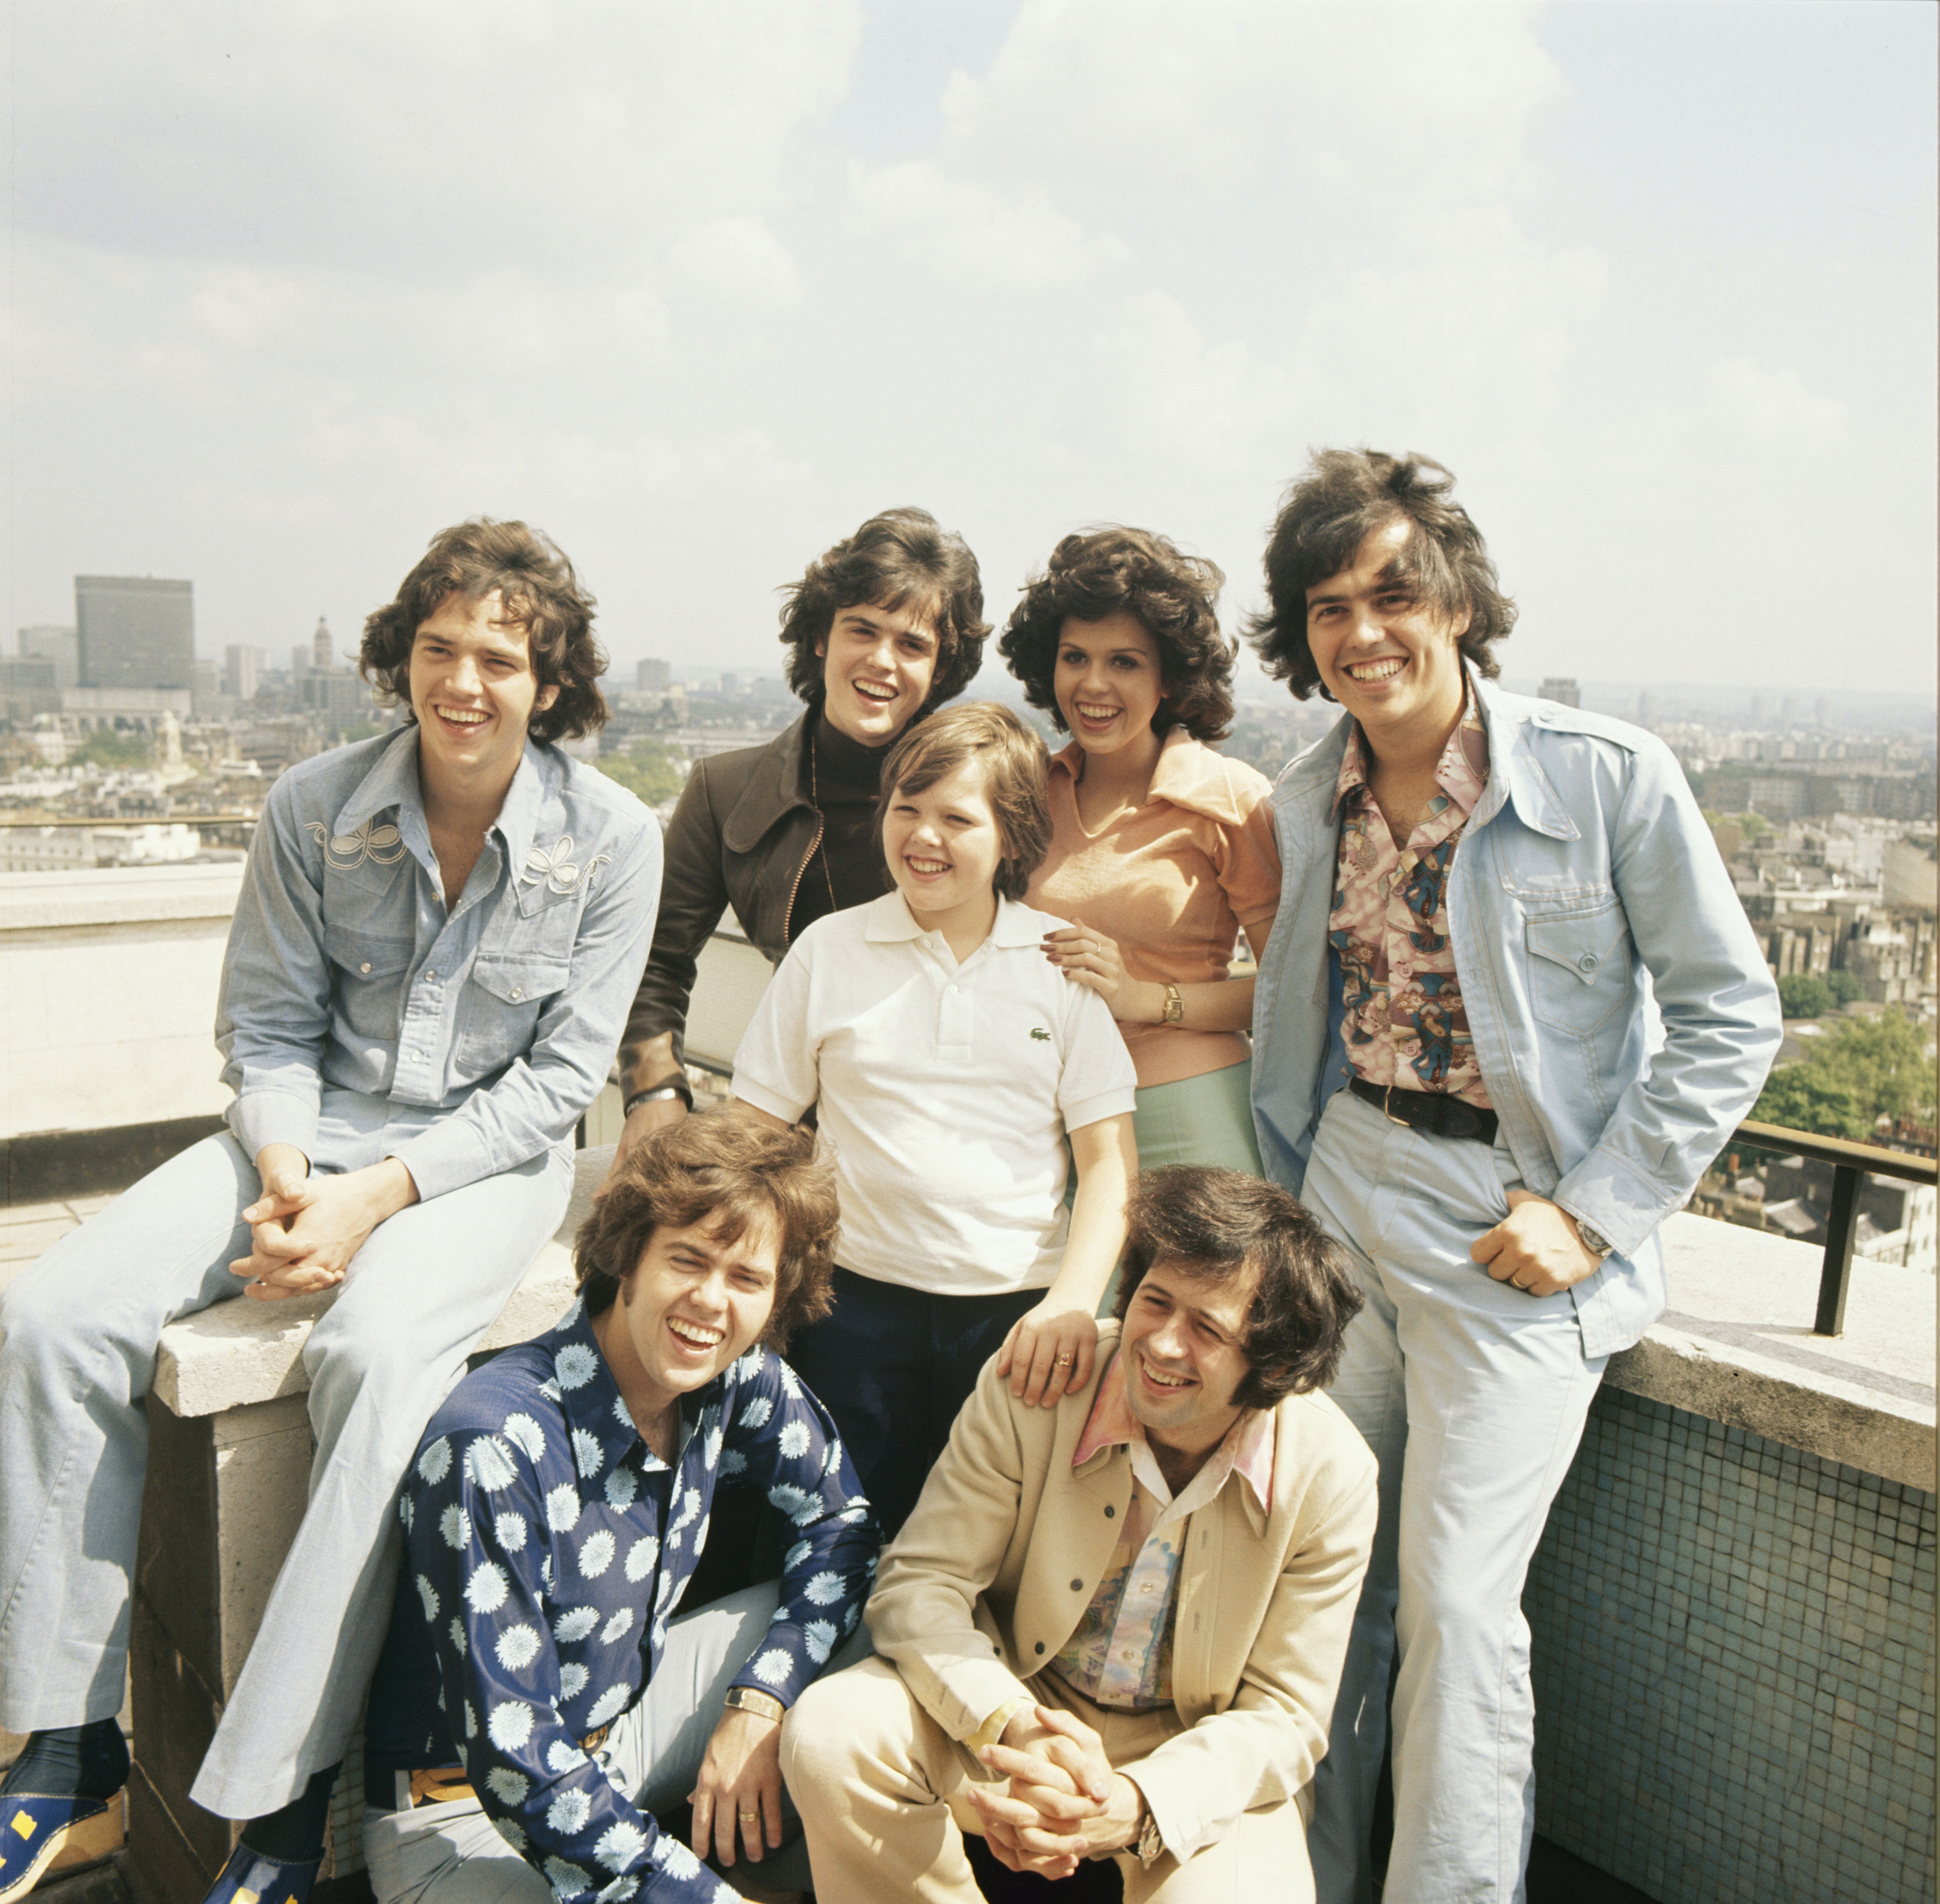 <p>The Osmond family made a splash in the music world more than 60 years ago, making their debut on an episode of "Disneyland After Dark" in 1962. </p><p>From there, they were discovered by Andy Williams' father, whose son then featured them as regulars on his show for the rest of the decade. By the early '70s, they were household names thanks to their bubblegum pop music, and a few of the siblings went on to launch solo careers and continue to keep the Osmond family name going in Hollywood.</p><p>In honor of youngest brother Jimmy's 61st birthday on April 16, 2024, we're checking in with the iconic sibling set...</p><p><em><span>Keep reading to se</span>e the siblings<span> then and now...</span></em></p><p>MORE: <a href="https://www.msn.com/en-us/community/channel/vid-kwt2e0544658wubk9hsb0rpvnfkttmu3tuj7uq3i4wuywgbakeva?item=flights%3Aprg-tipsubsc-v1a&ocid=social-peregrine&cvid=333aa5de5a654aa7a98a6930005e8f60&ei=2" rel="noreferrer noopener">Follow Wonderwall on MSN for more fun celebrity & entertainment photo galleries and content</a></p>